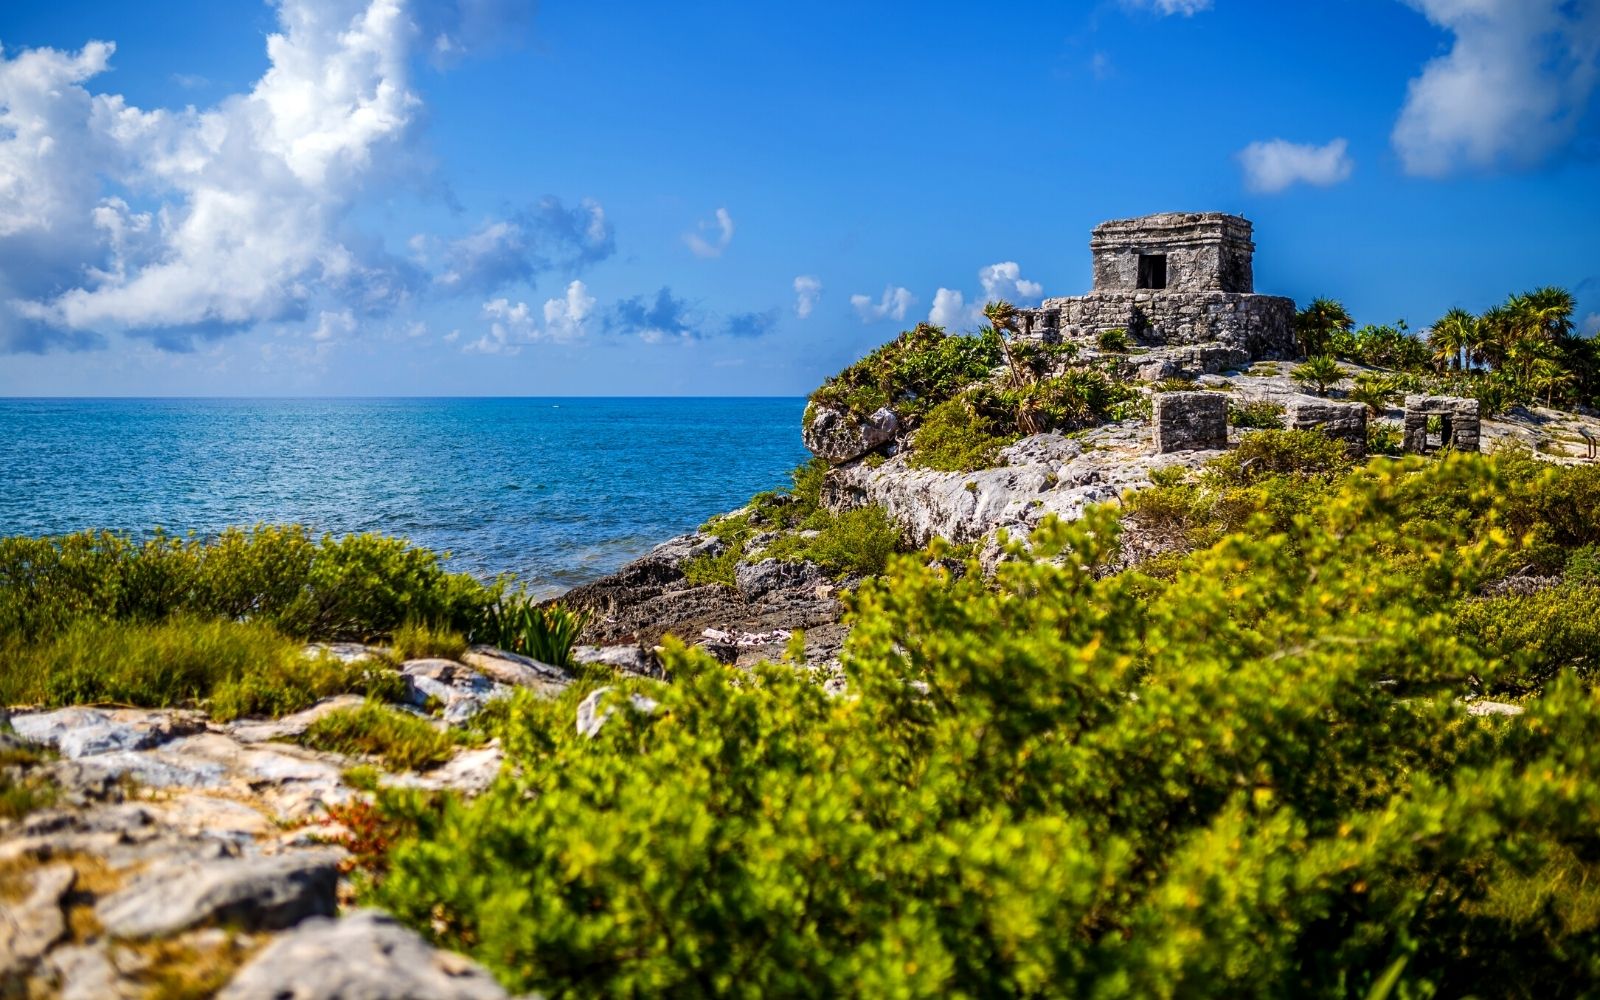 How To Visit The Tulum Ruins in Mexico